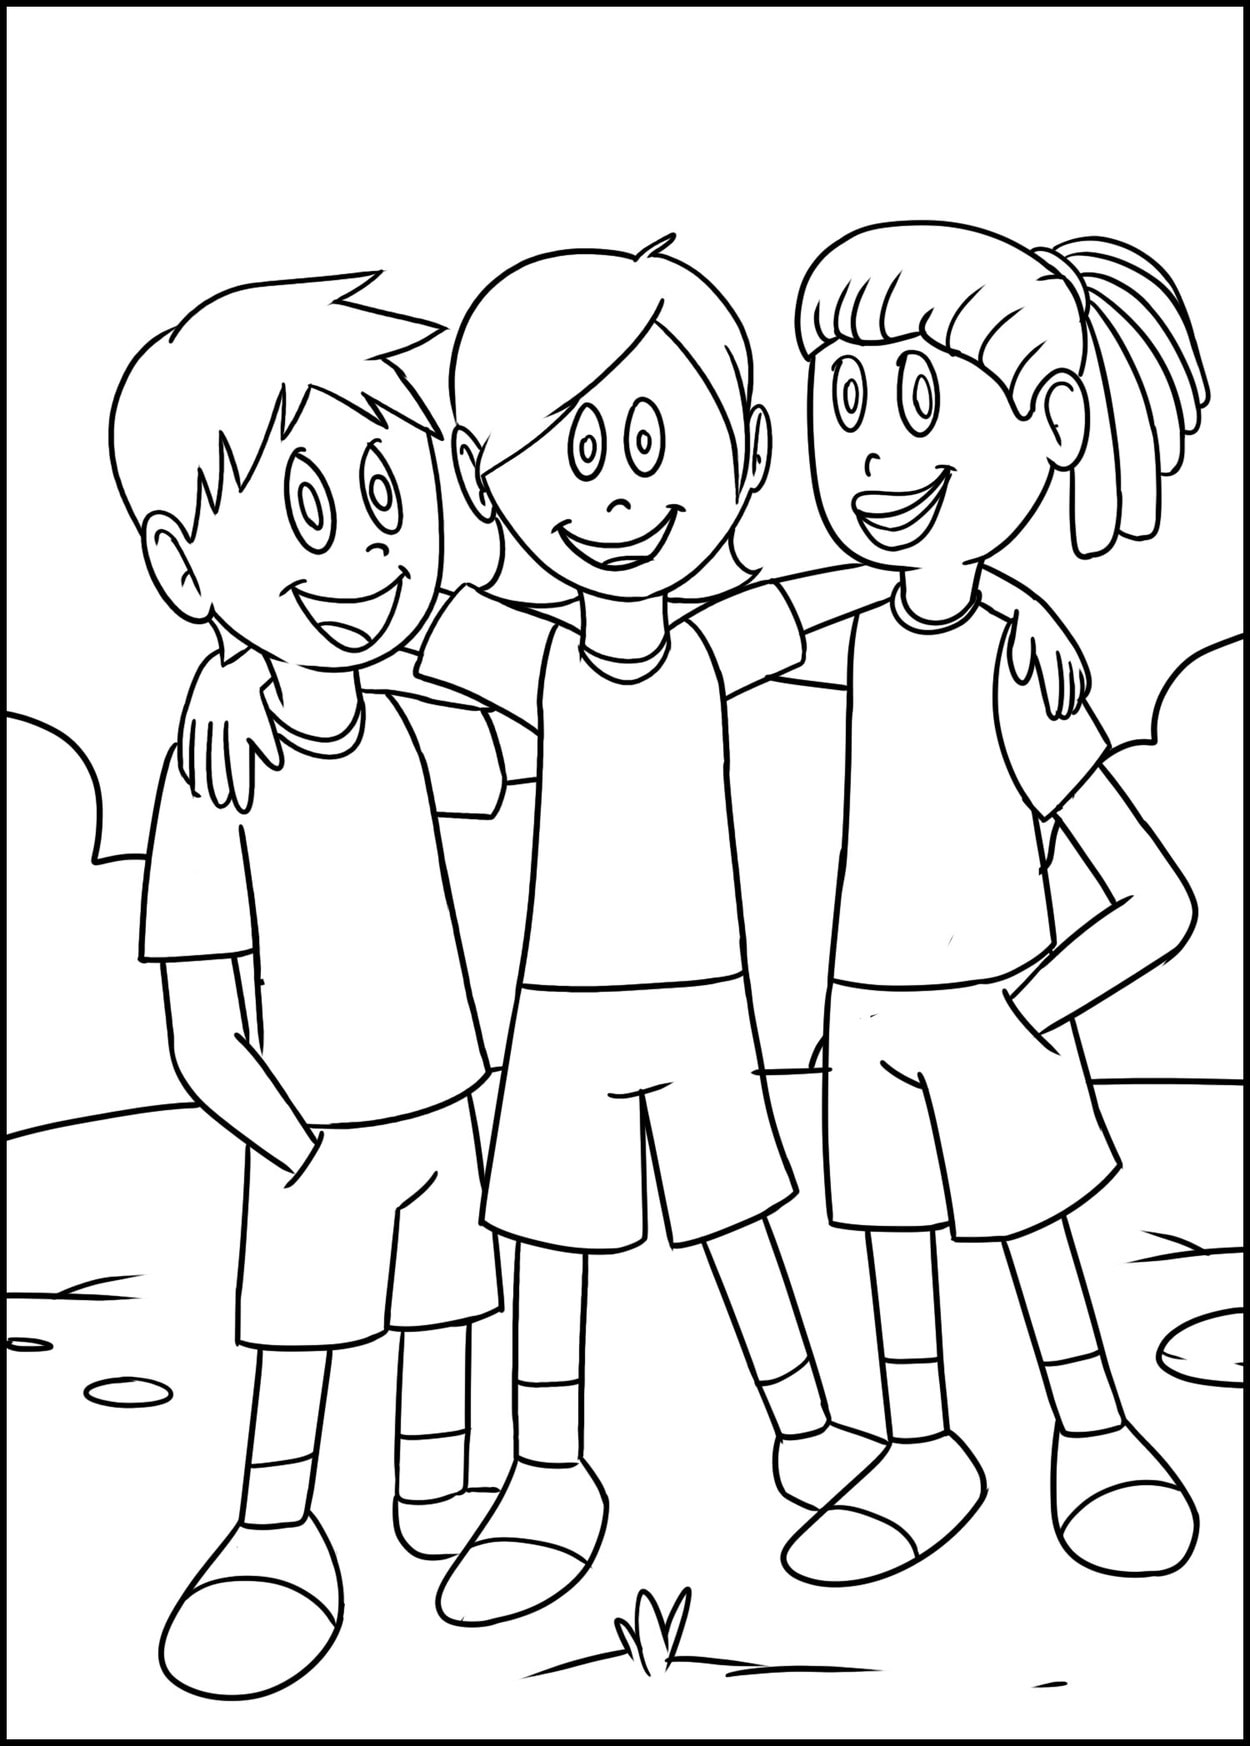 FREE Camp Coloring Book for Kids! - Christian Camp Pro